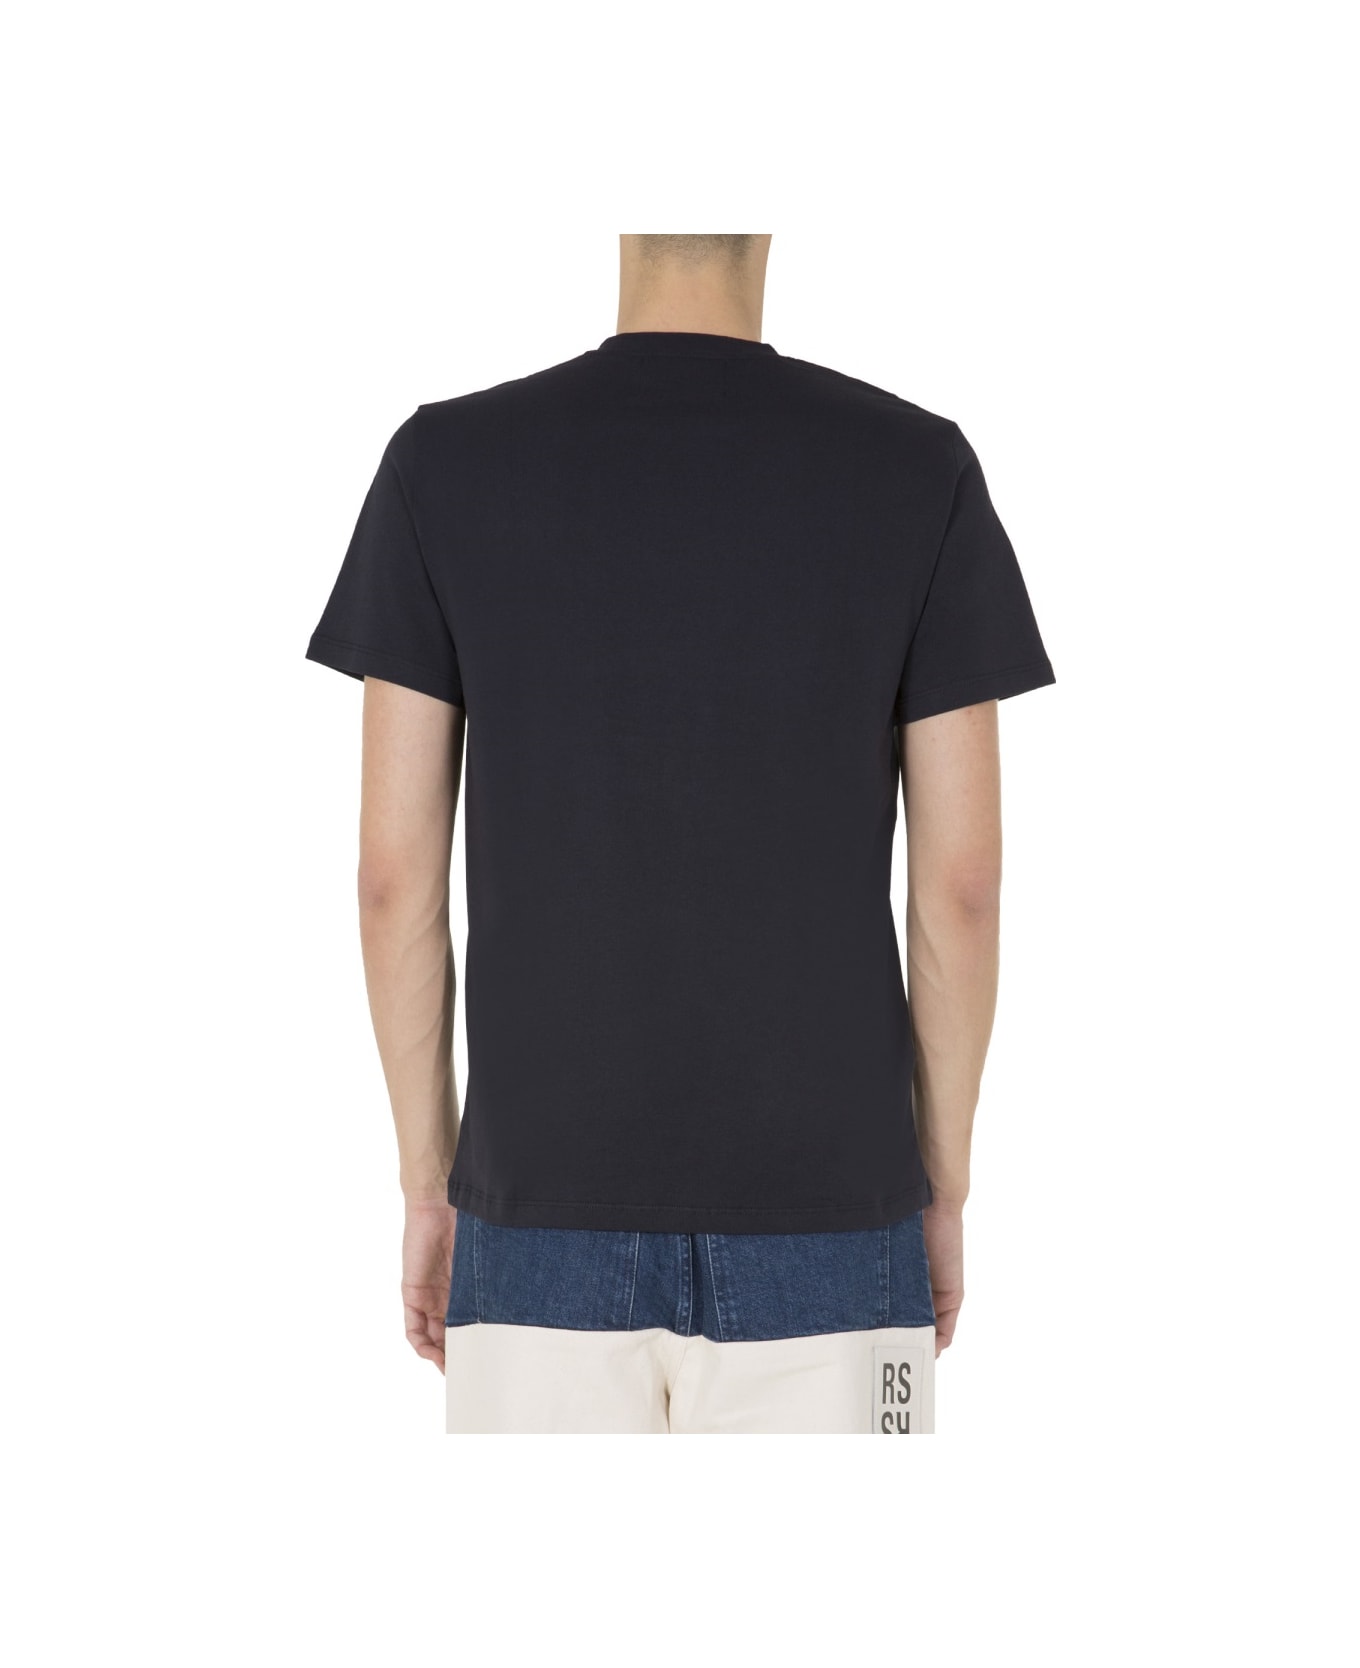 Fred Perry by Raf Simons Round Neck T-shirt - BLUE シャツ